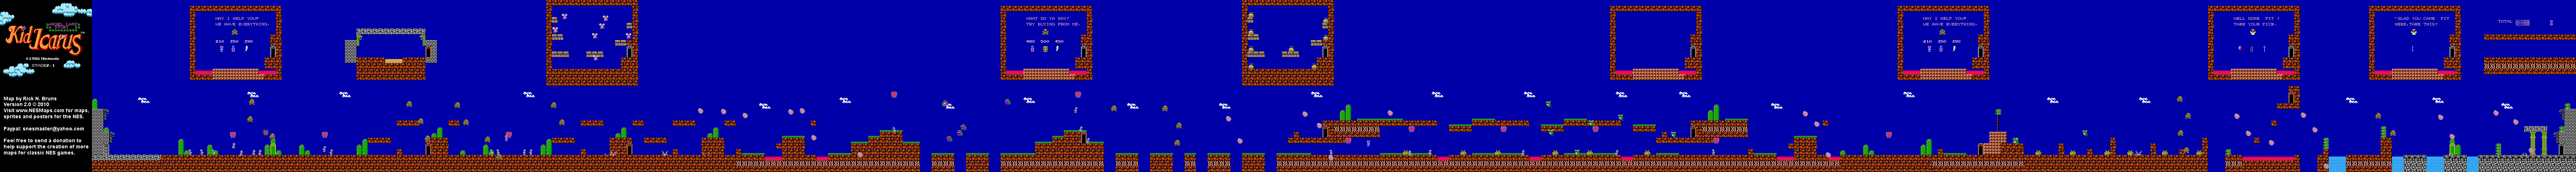 Kid Icarus - Stage 2-1 - NES Map